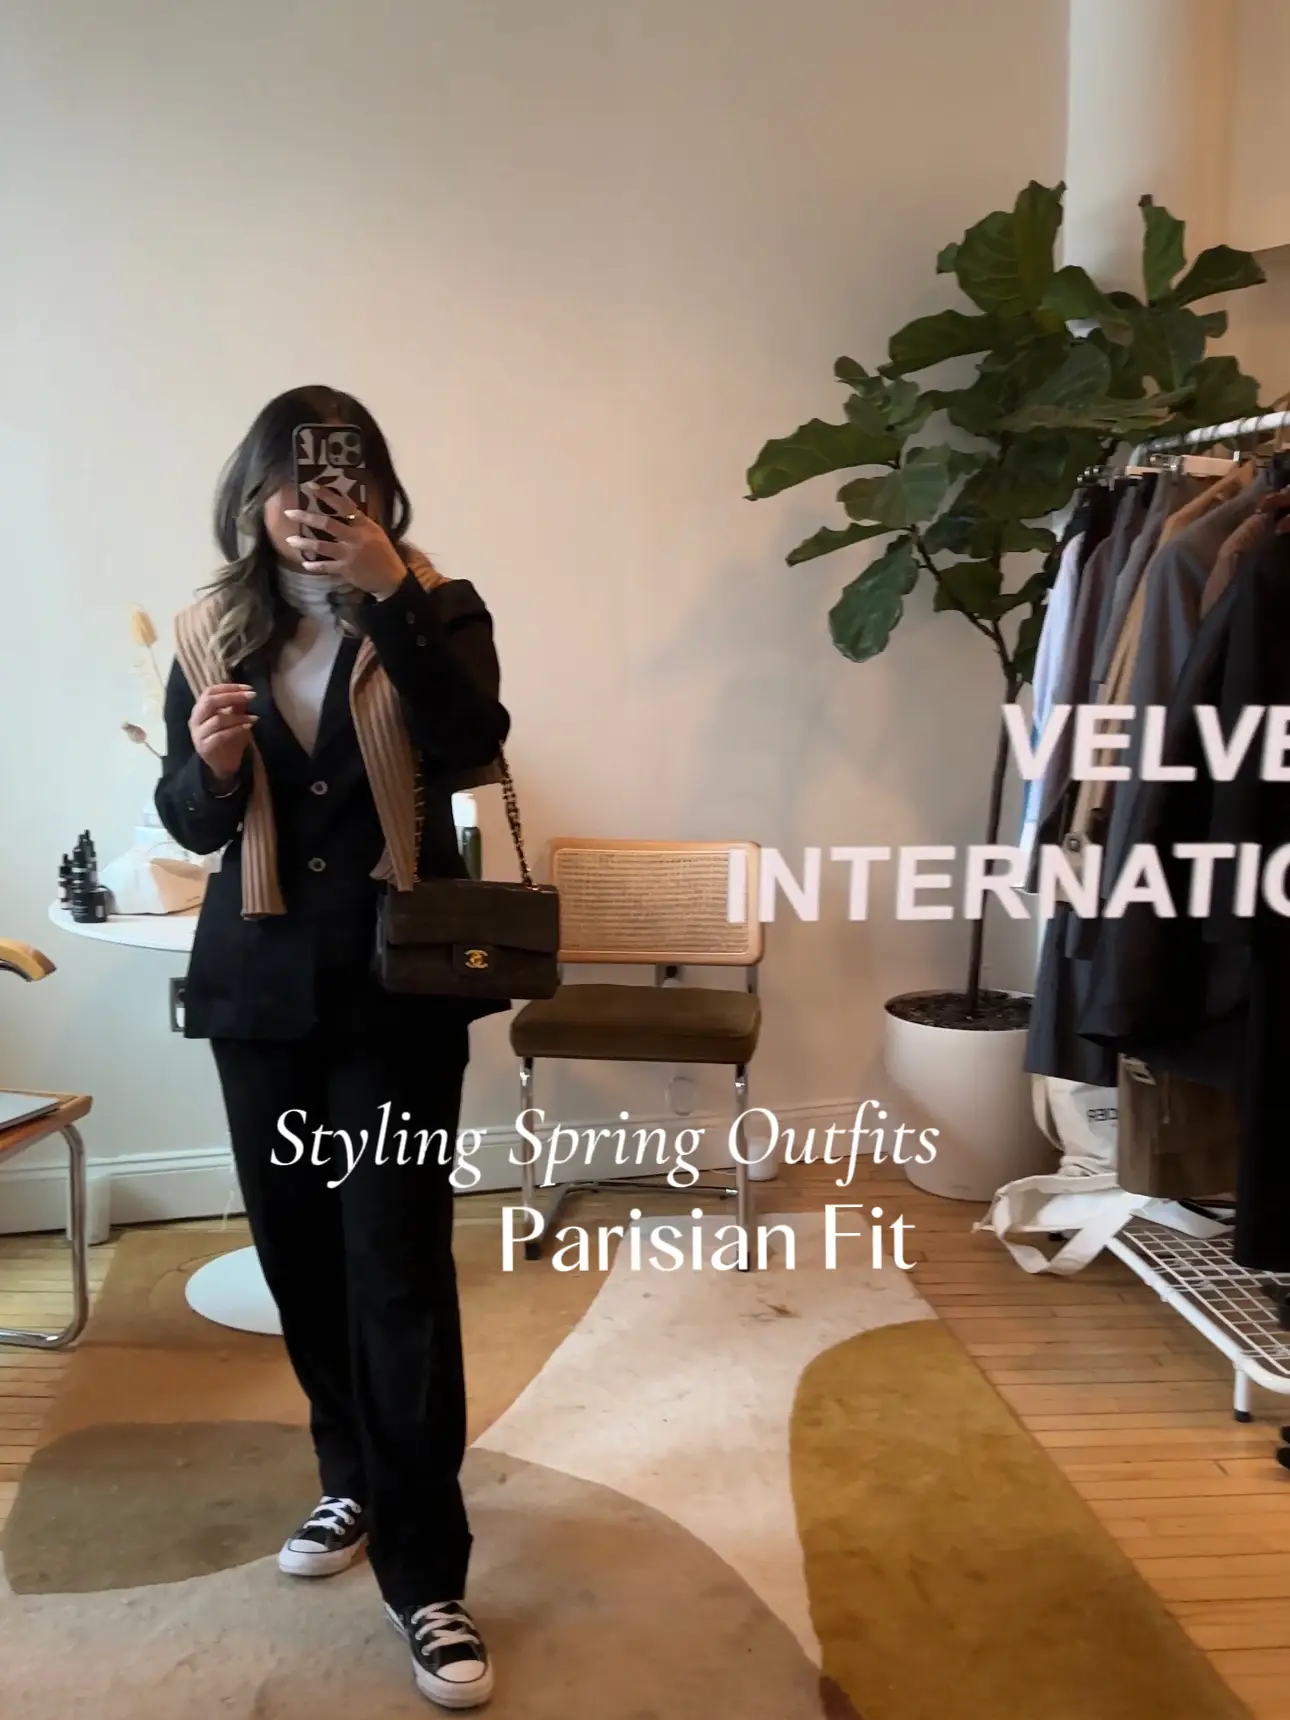 Parisian Fit for Spring Style's images